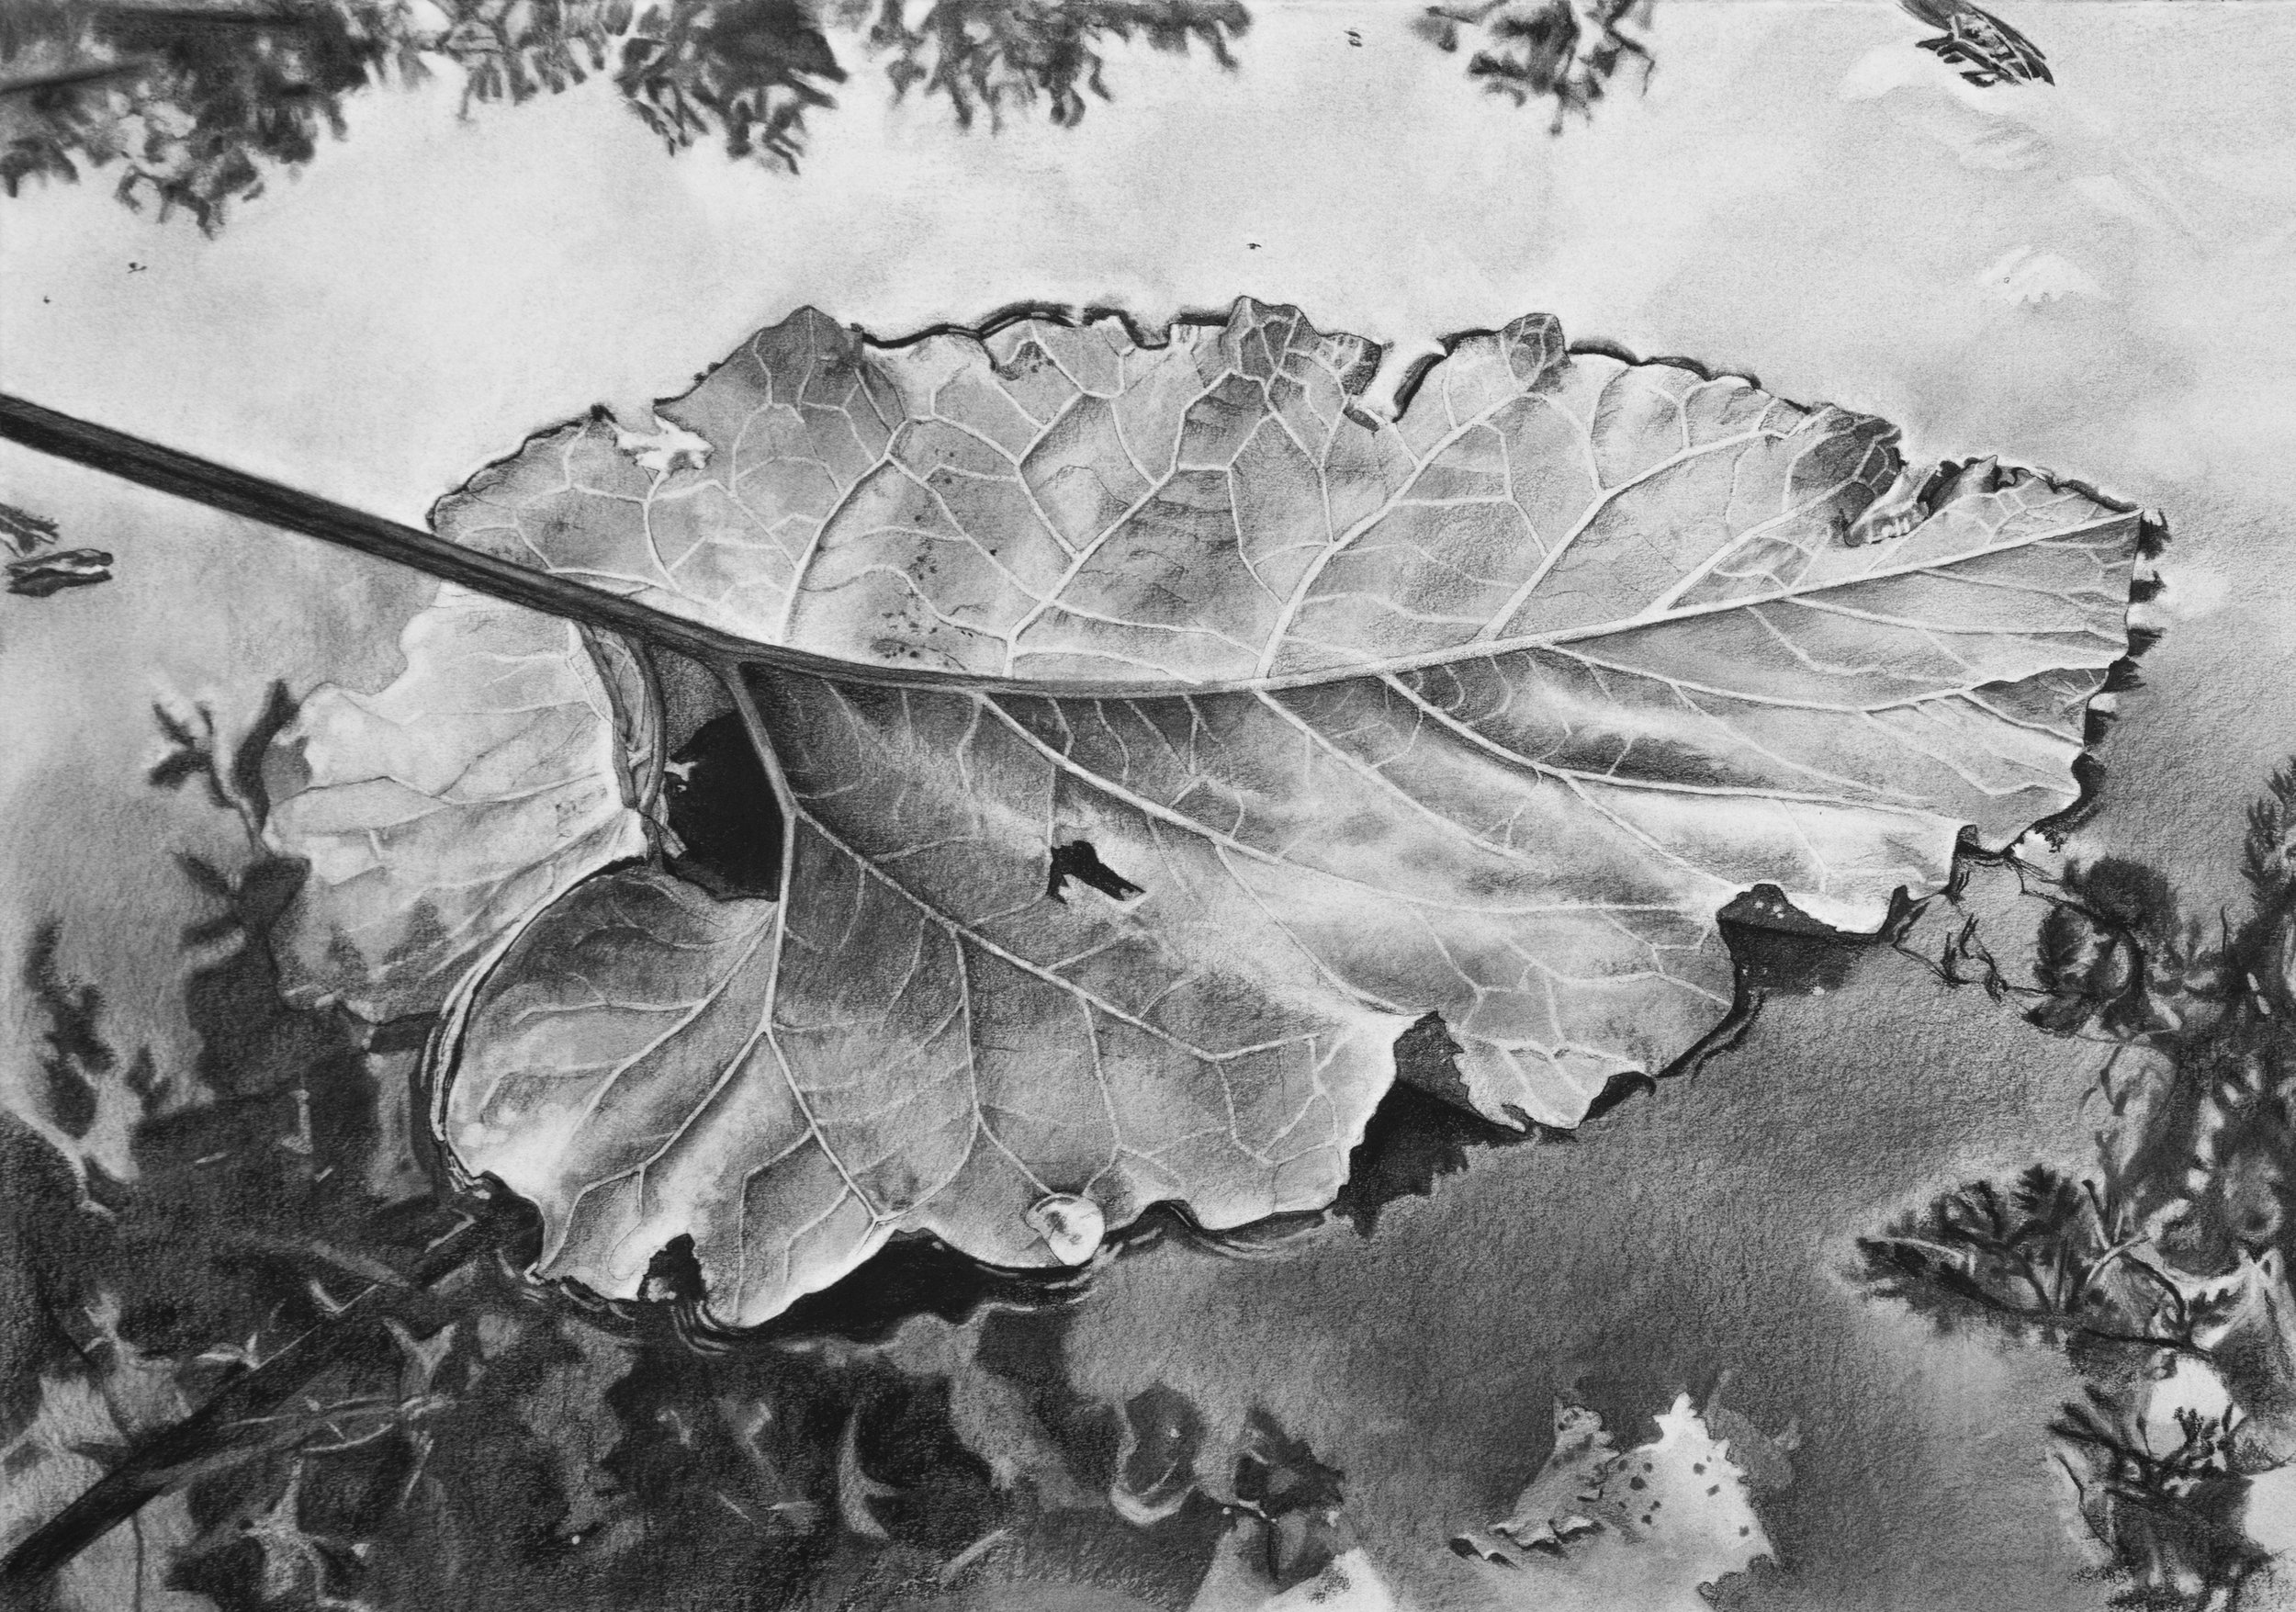  lily pad, charcoal on paper, 40” x 25” 